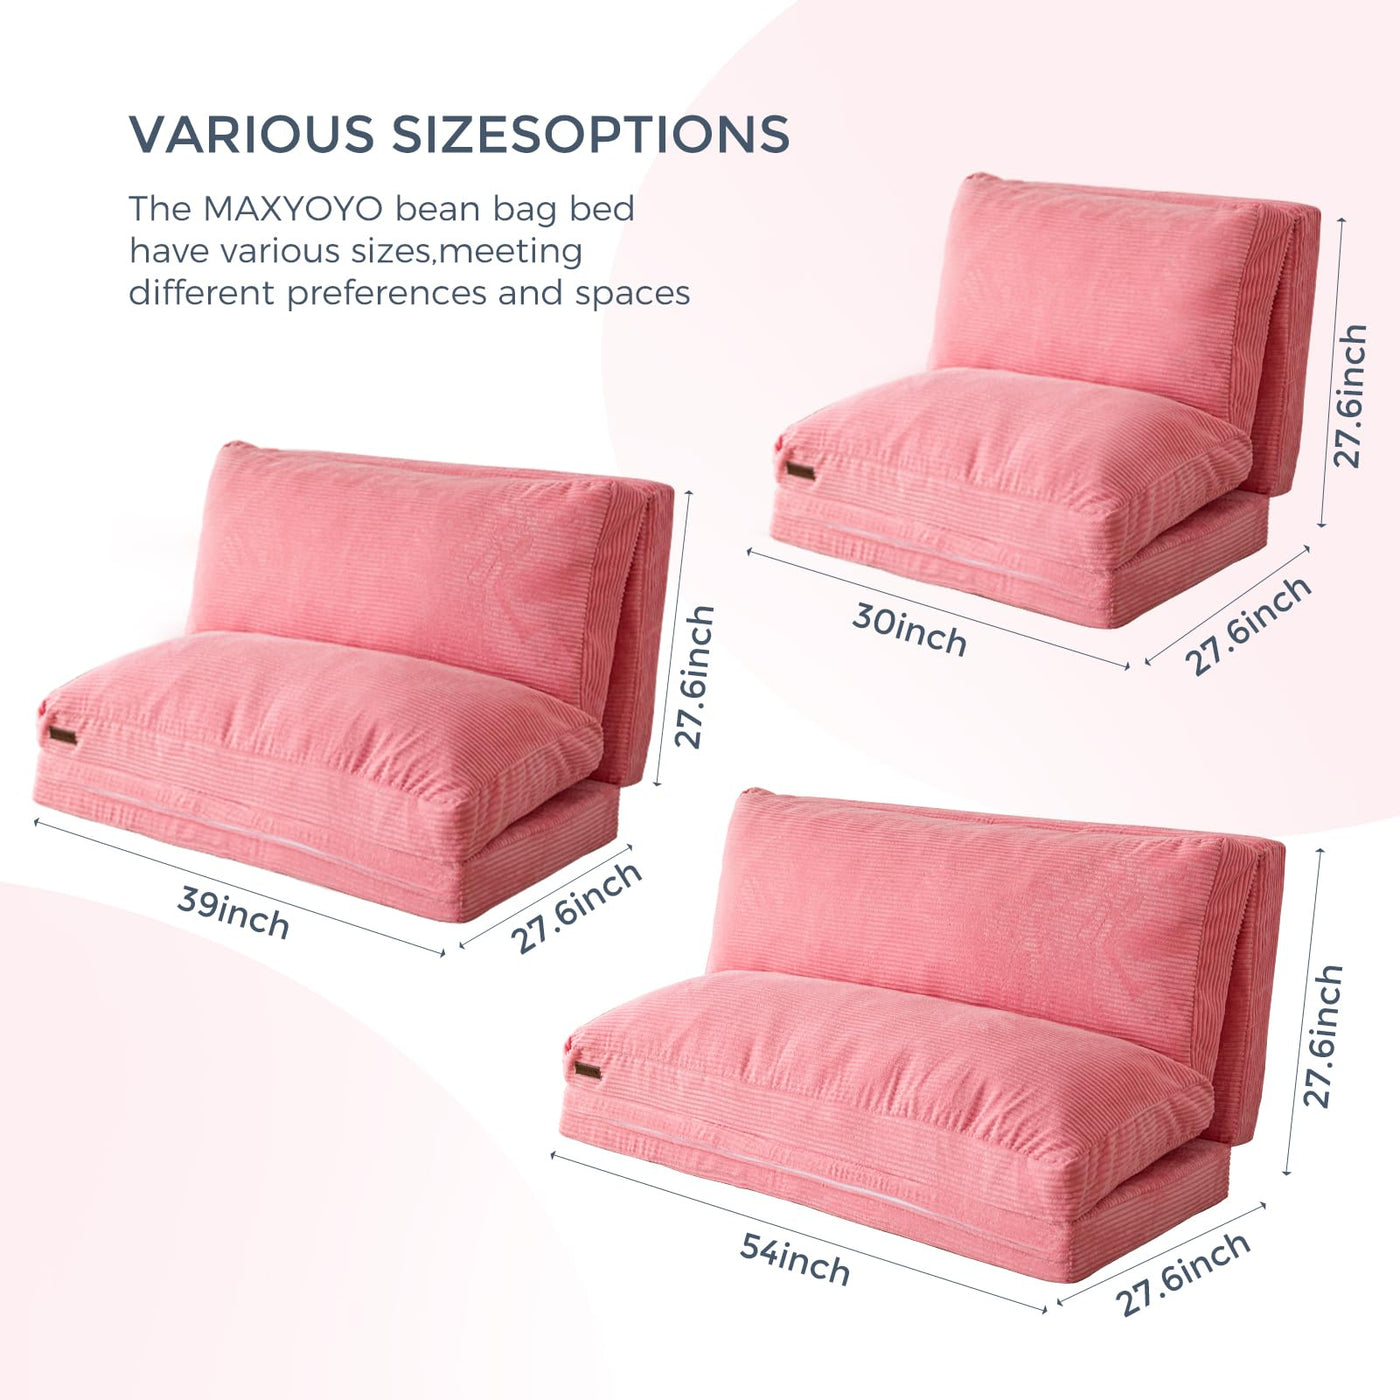 MAXYOYO Bean Bag Folding Sofa Bed with Corduroy Washable Cover, Extra Thick and Long Floor Sofa for Adults, Pink